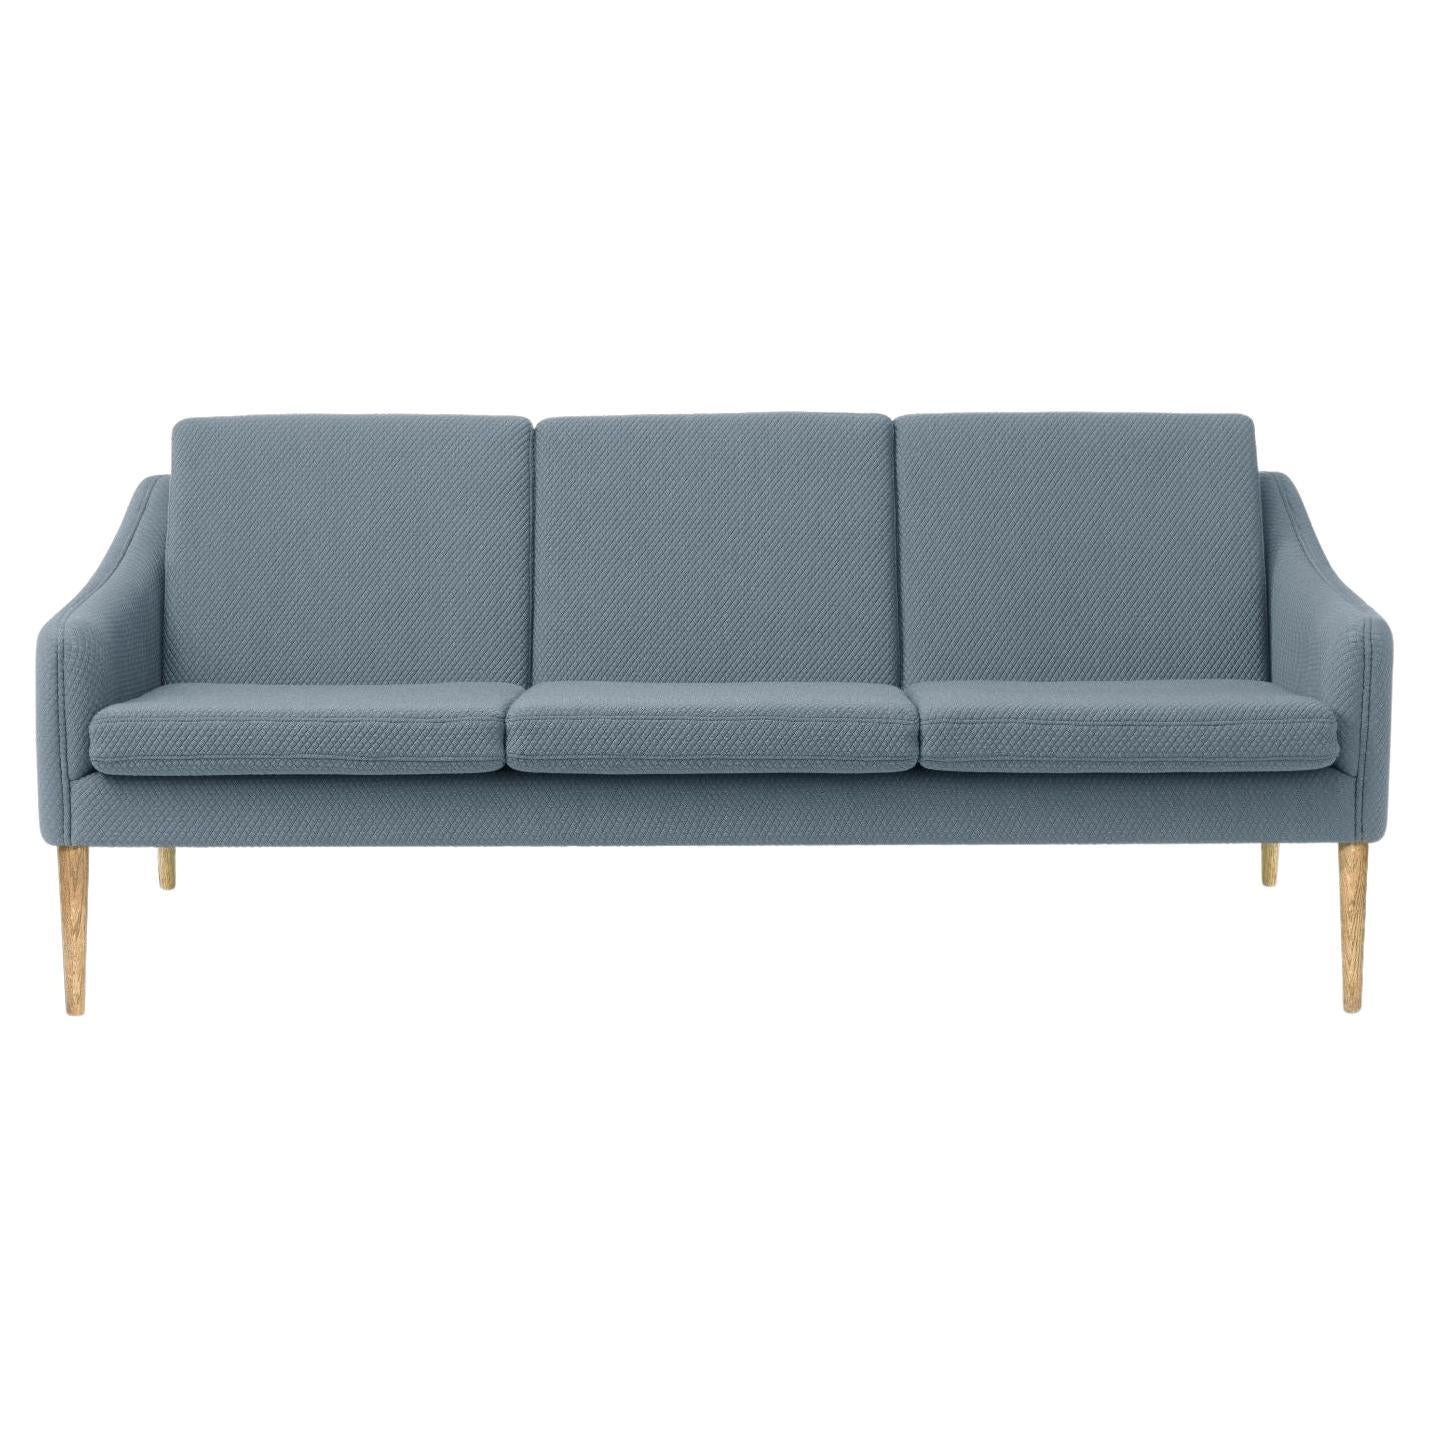 Mr Olsen 3 Seater Oak Mosaic Cloudy Grey by Warm Nordic For Sale